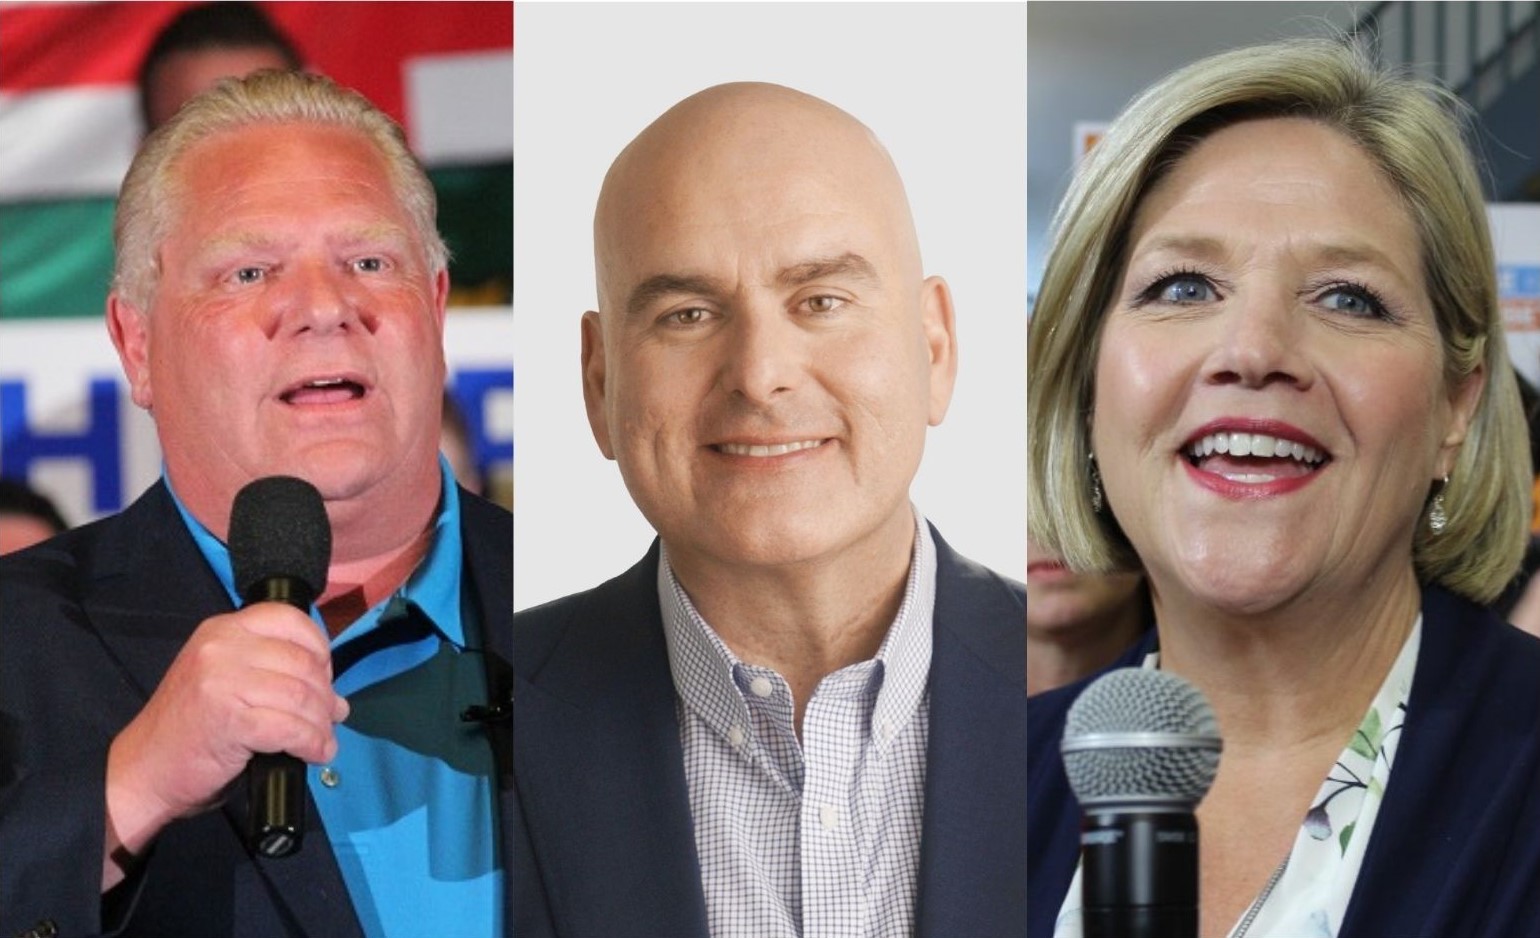 Party leaders battle for southwestern Ontario as campaign enters final week